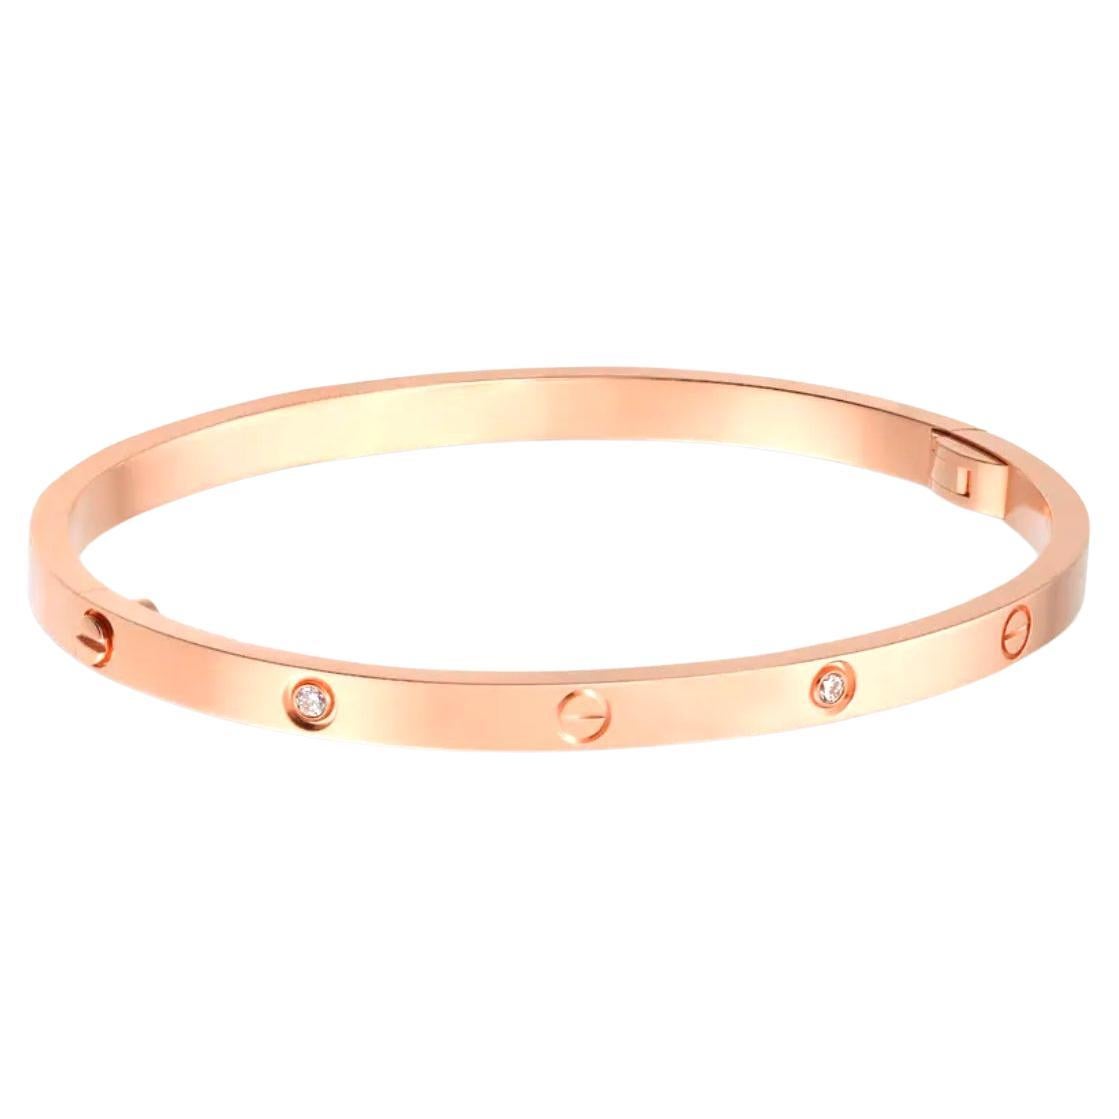 Cartier Small Love Bracelet with 6 Diamonds in 18k Rose Gold